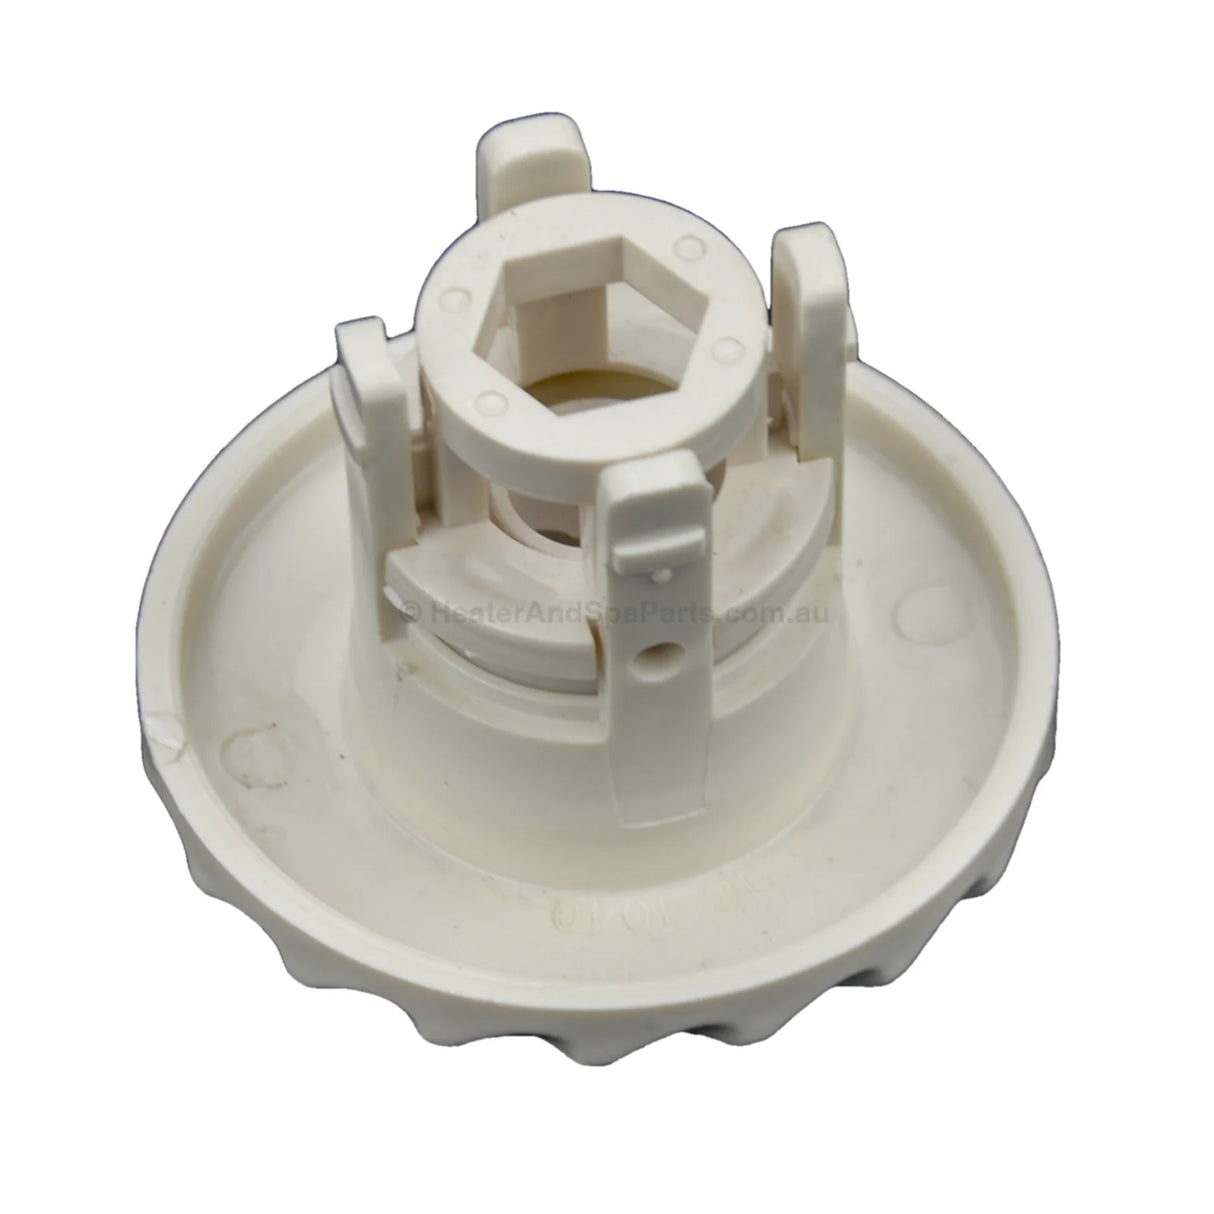 66mm Waterway Adjustable Mini Jet - Twin Pulse Roto - White - Heater and Spa Parts